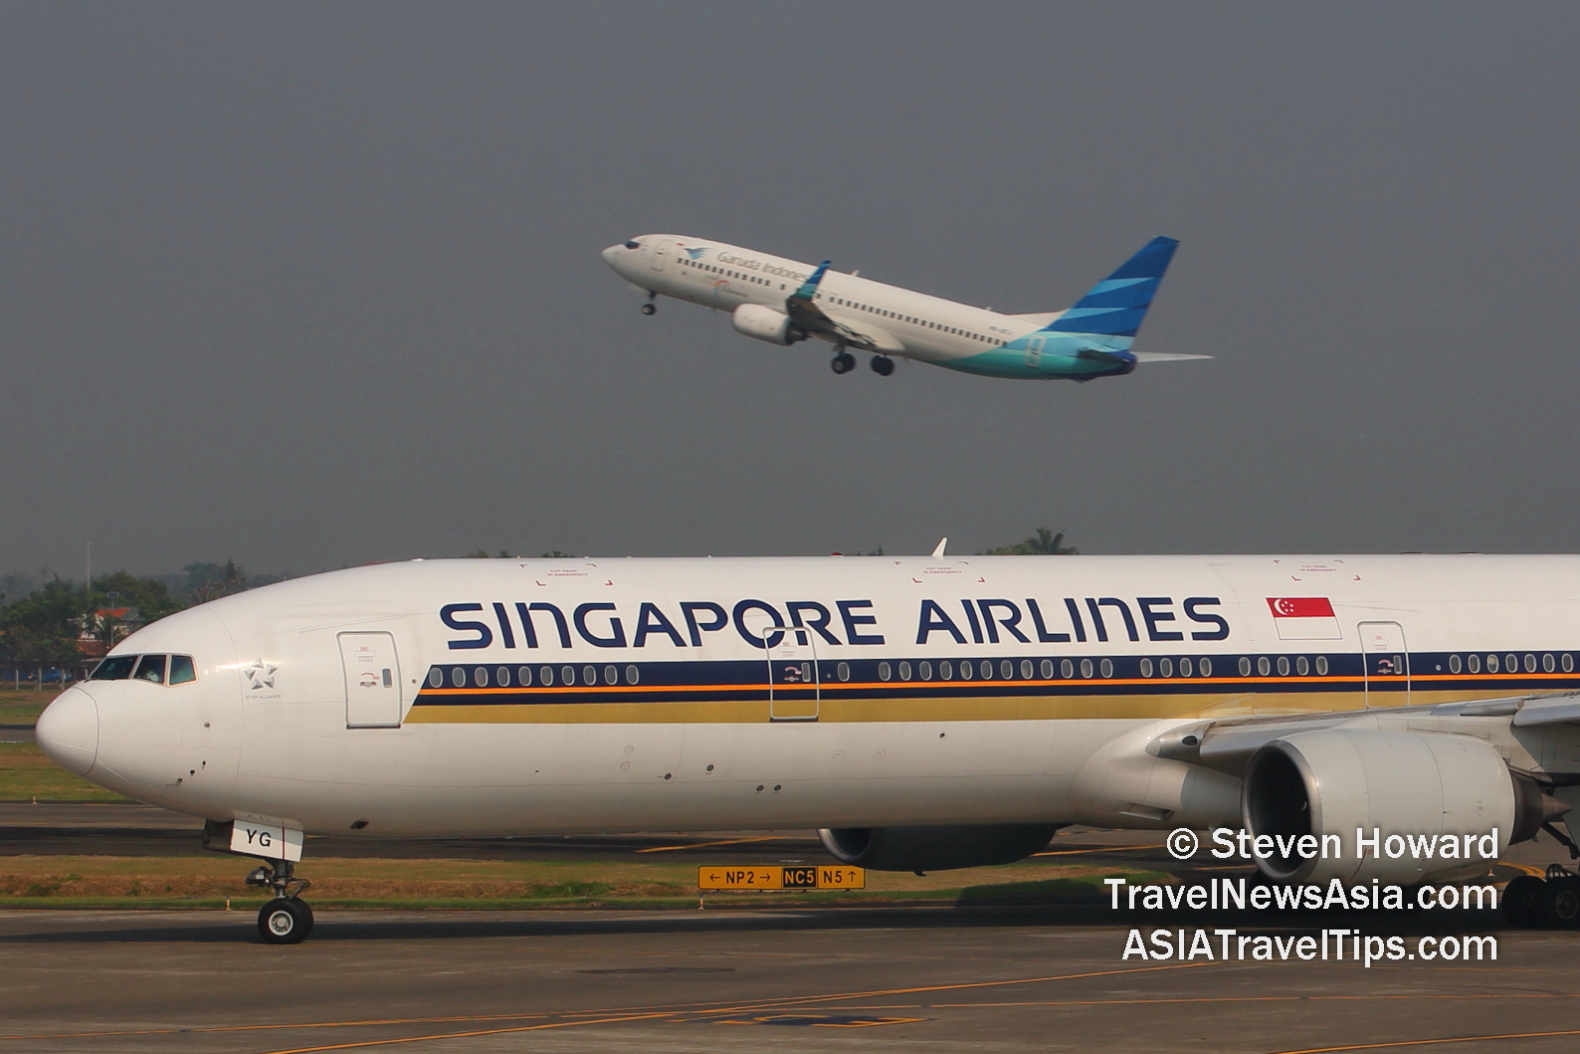 Singapore Airlines B777 in foreground with a Garuda Indonesia aircraft taking off in the background. Picture by Steven Howard of TravelNewsAsia.com Click to enlarge.